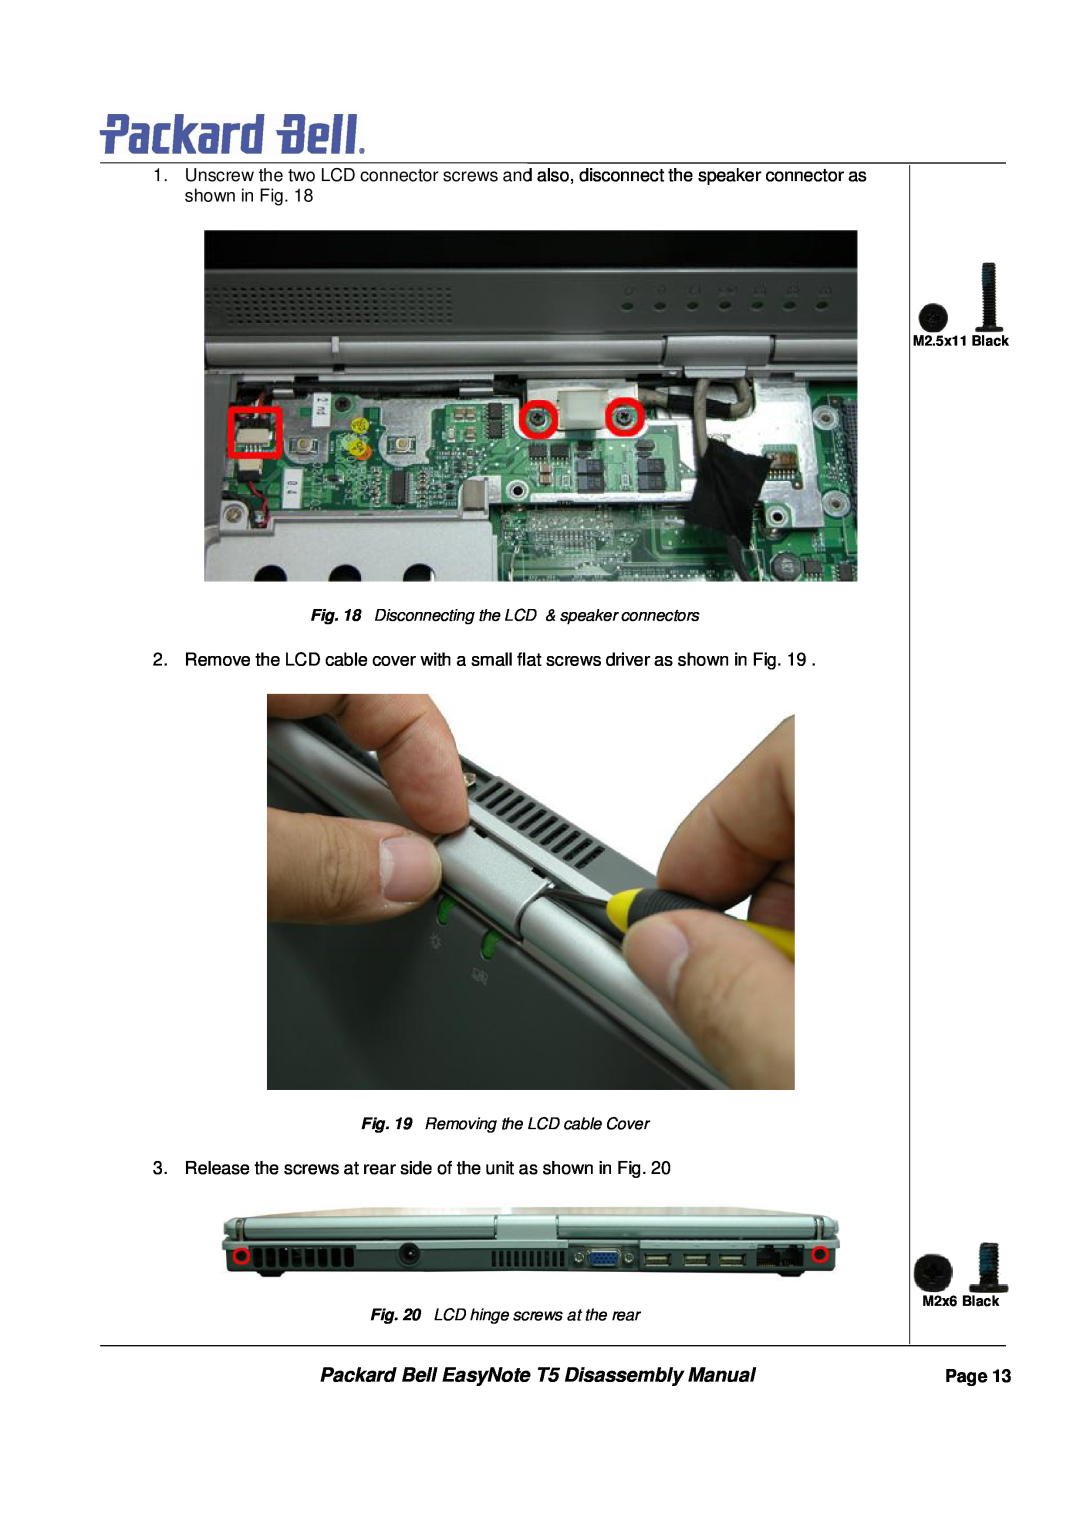 Packard Bell Packard Bell EasyNote T5 Disassembly Manual, Release the screws at rear side of the unit as shown in Fig 